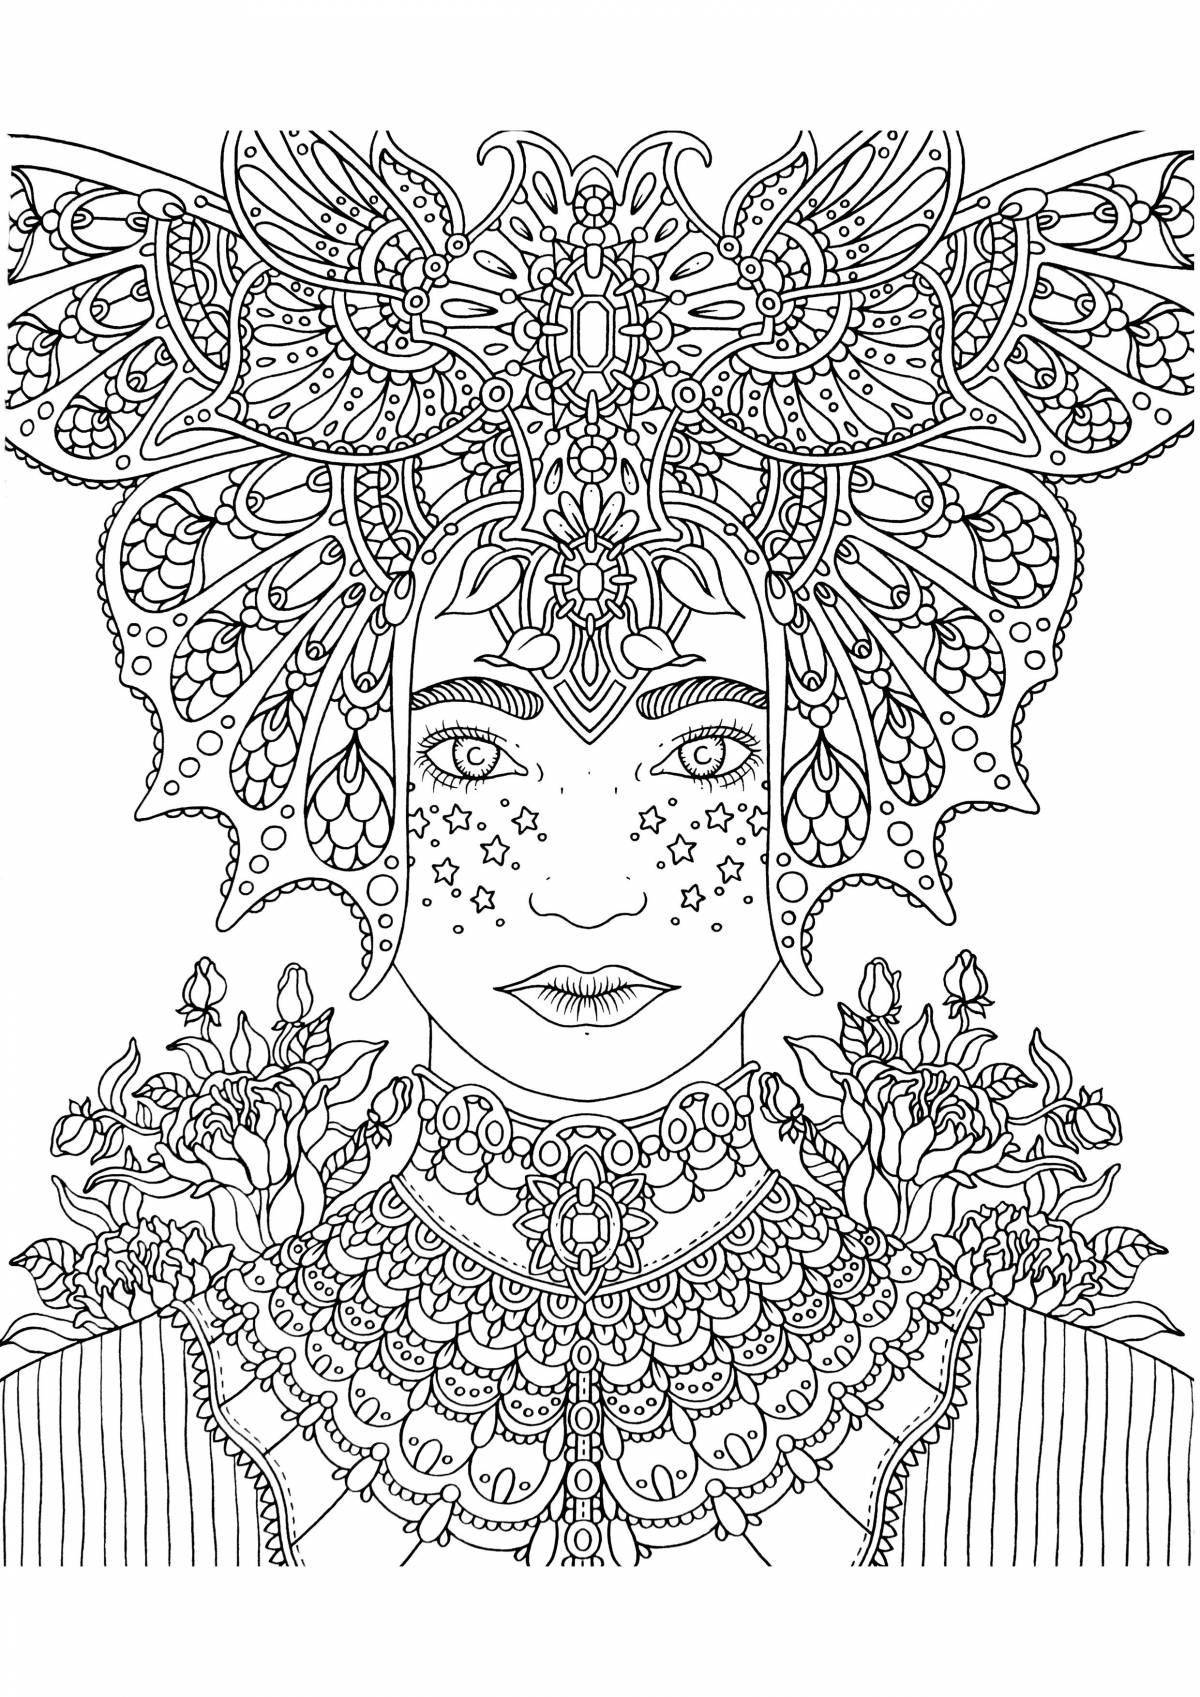 Majestic midnight masquerade coloring page